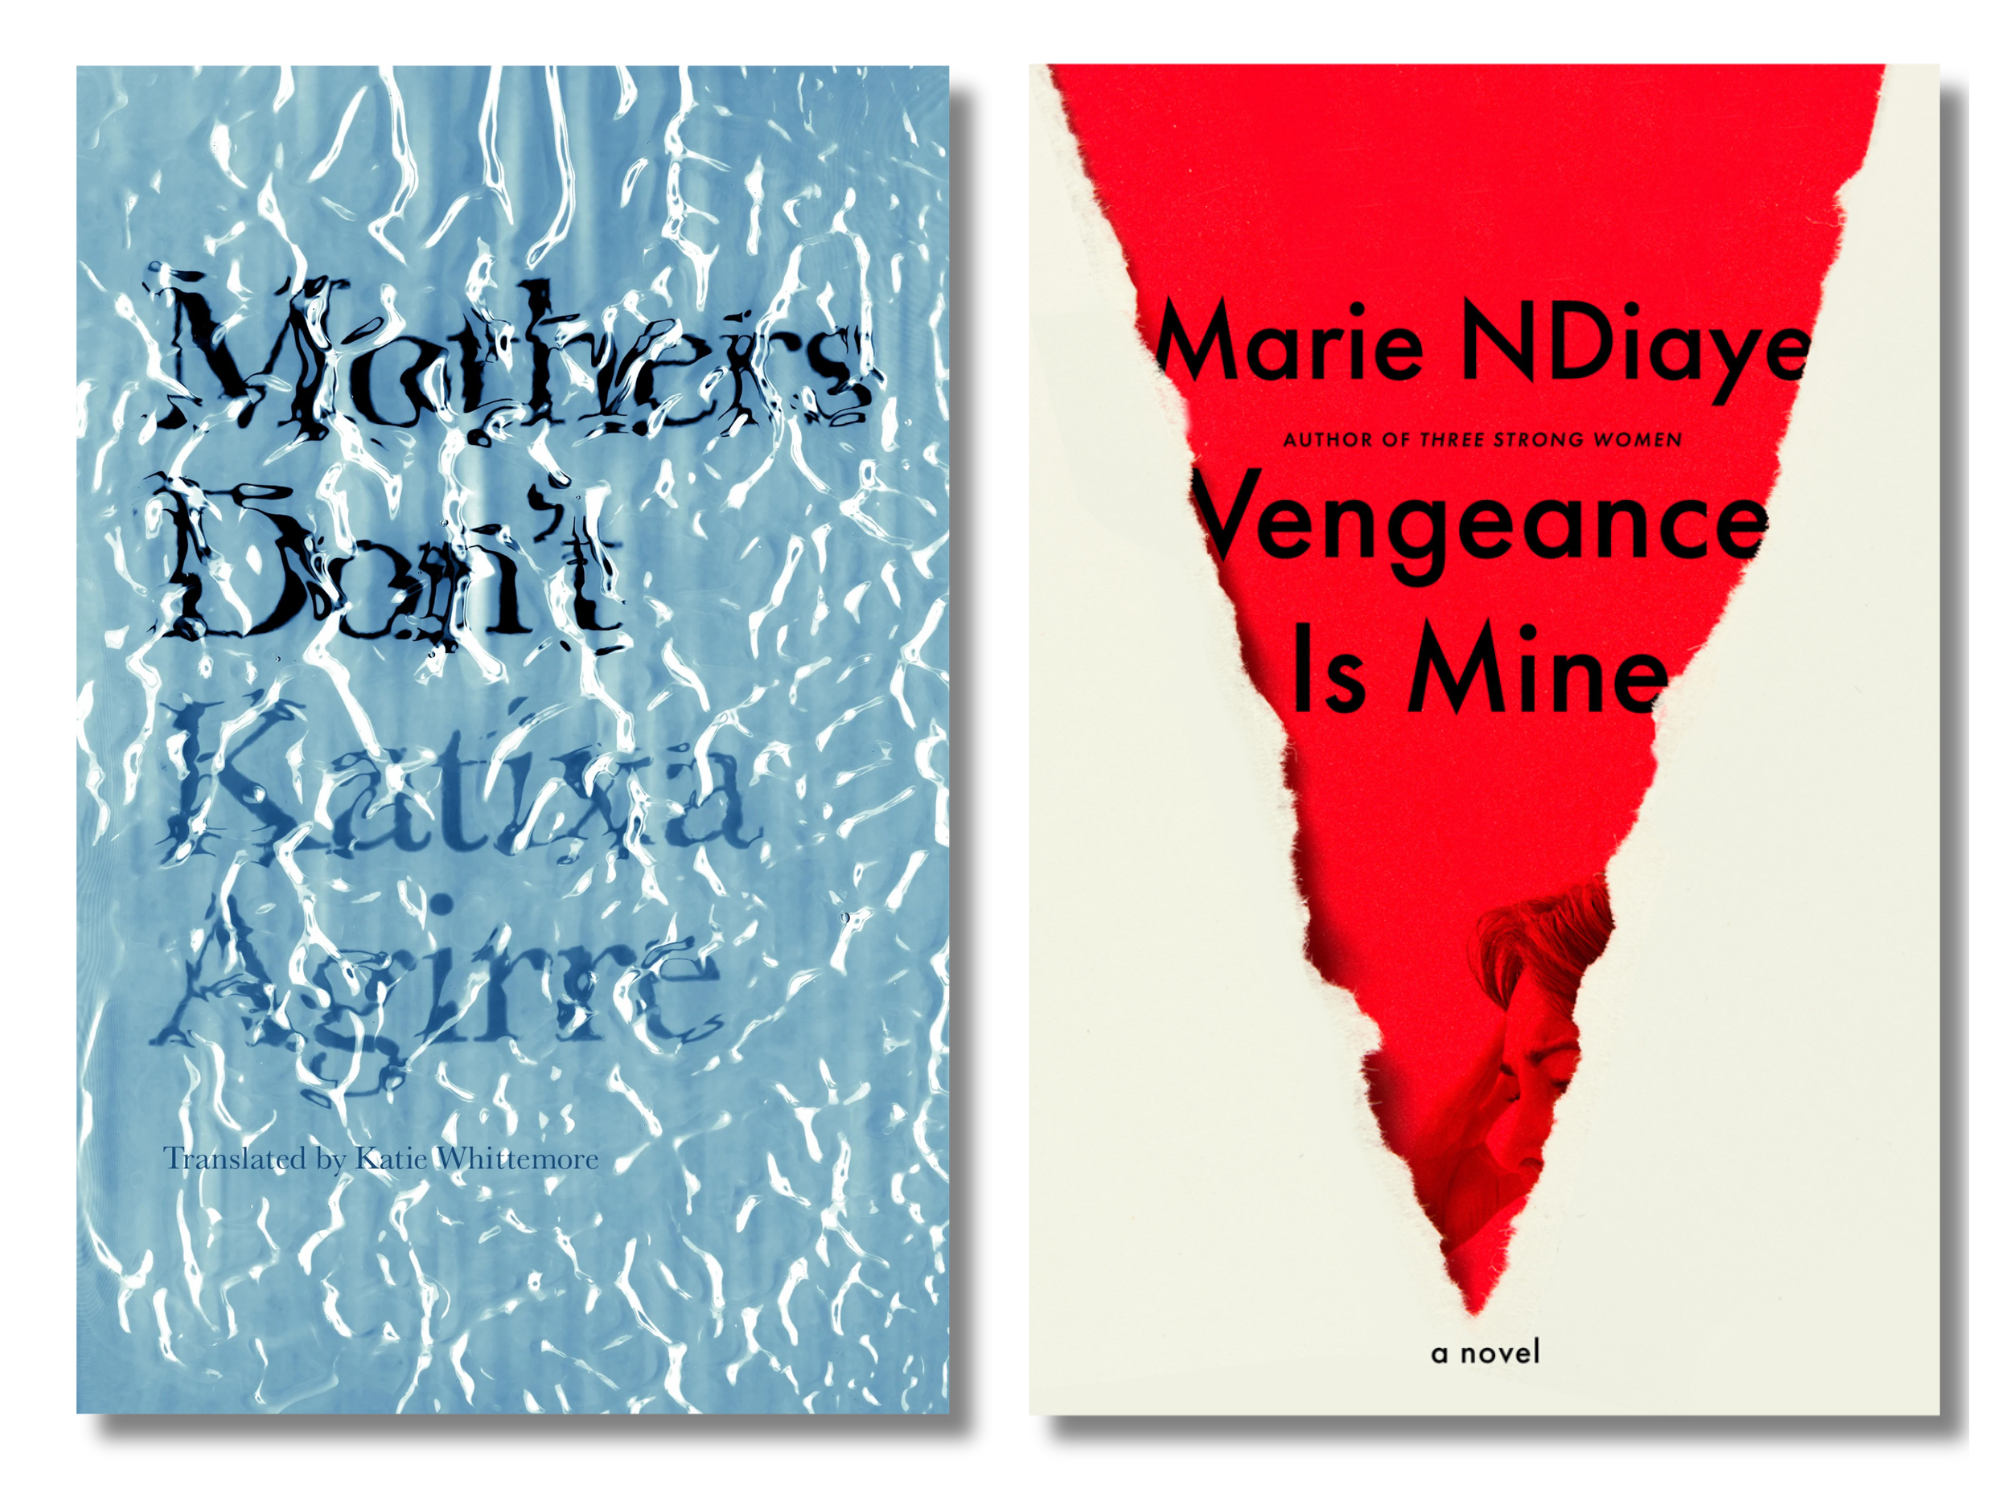 The cover of Katixa Agirre's "Mothers Don't," translated by Katie Whittemore, and "Vengeance Is Mine" by Marie NDiaye, translated by Jordan Stump